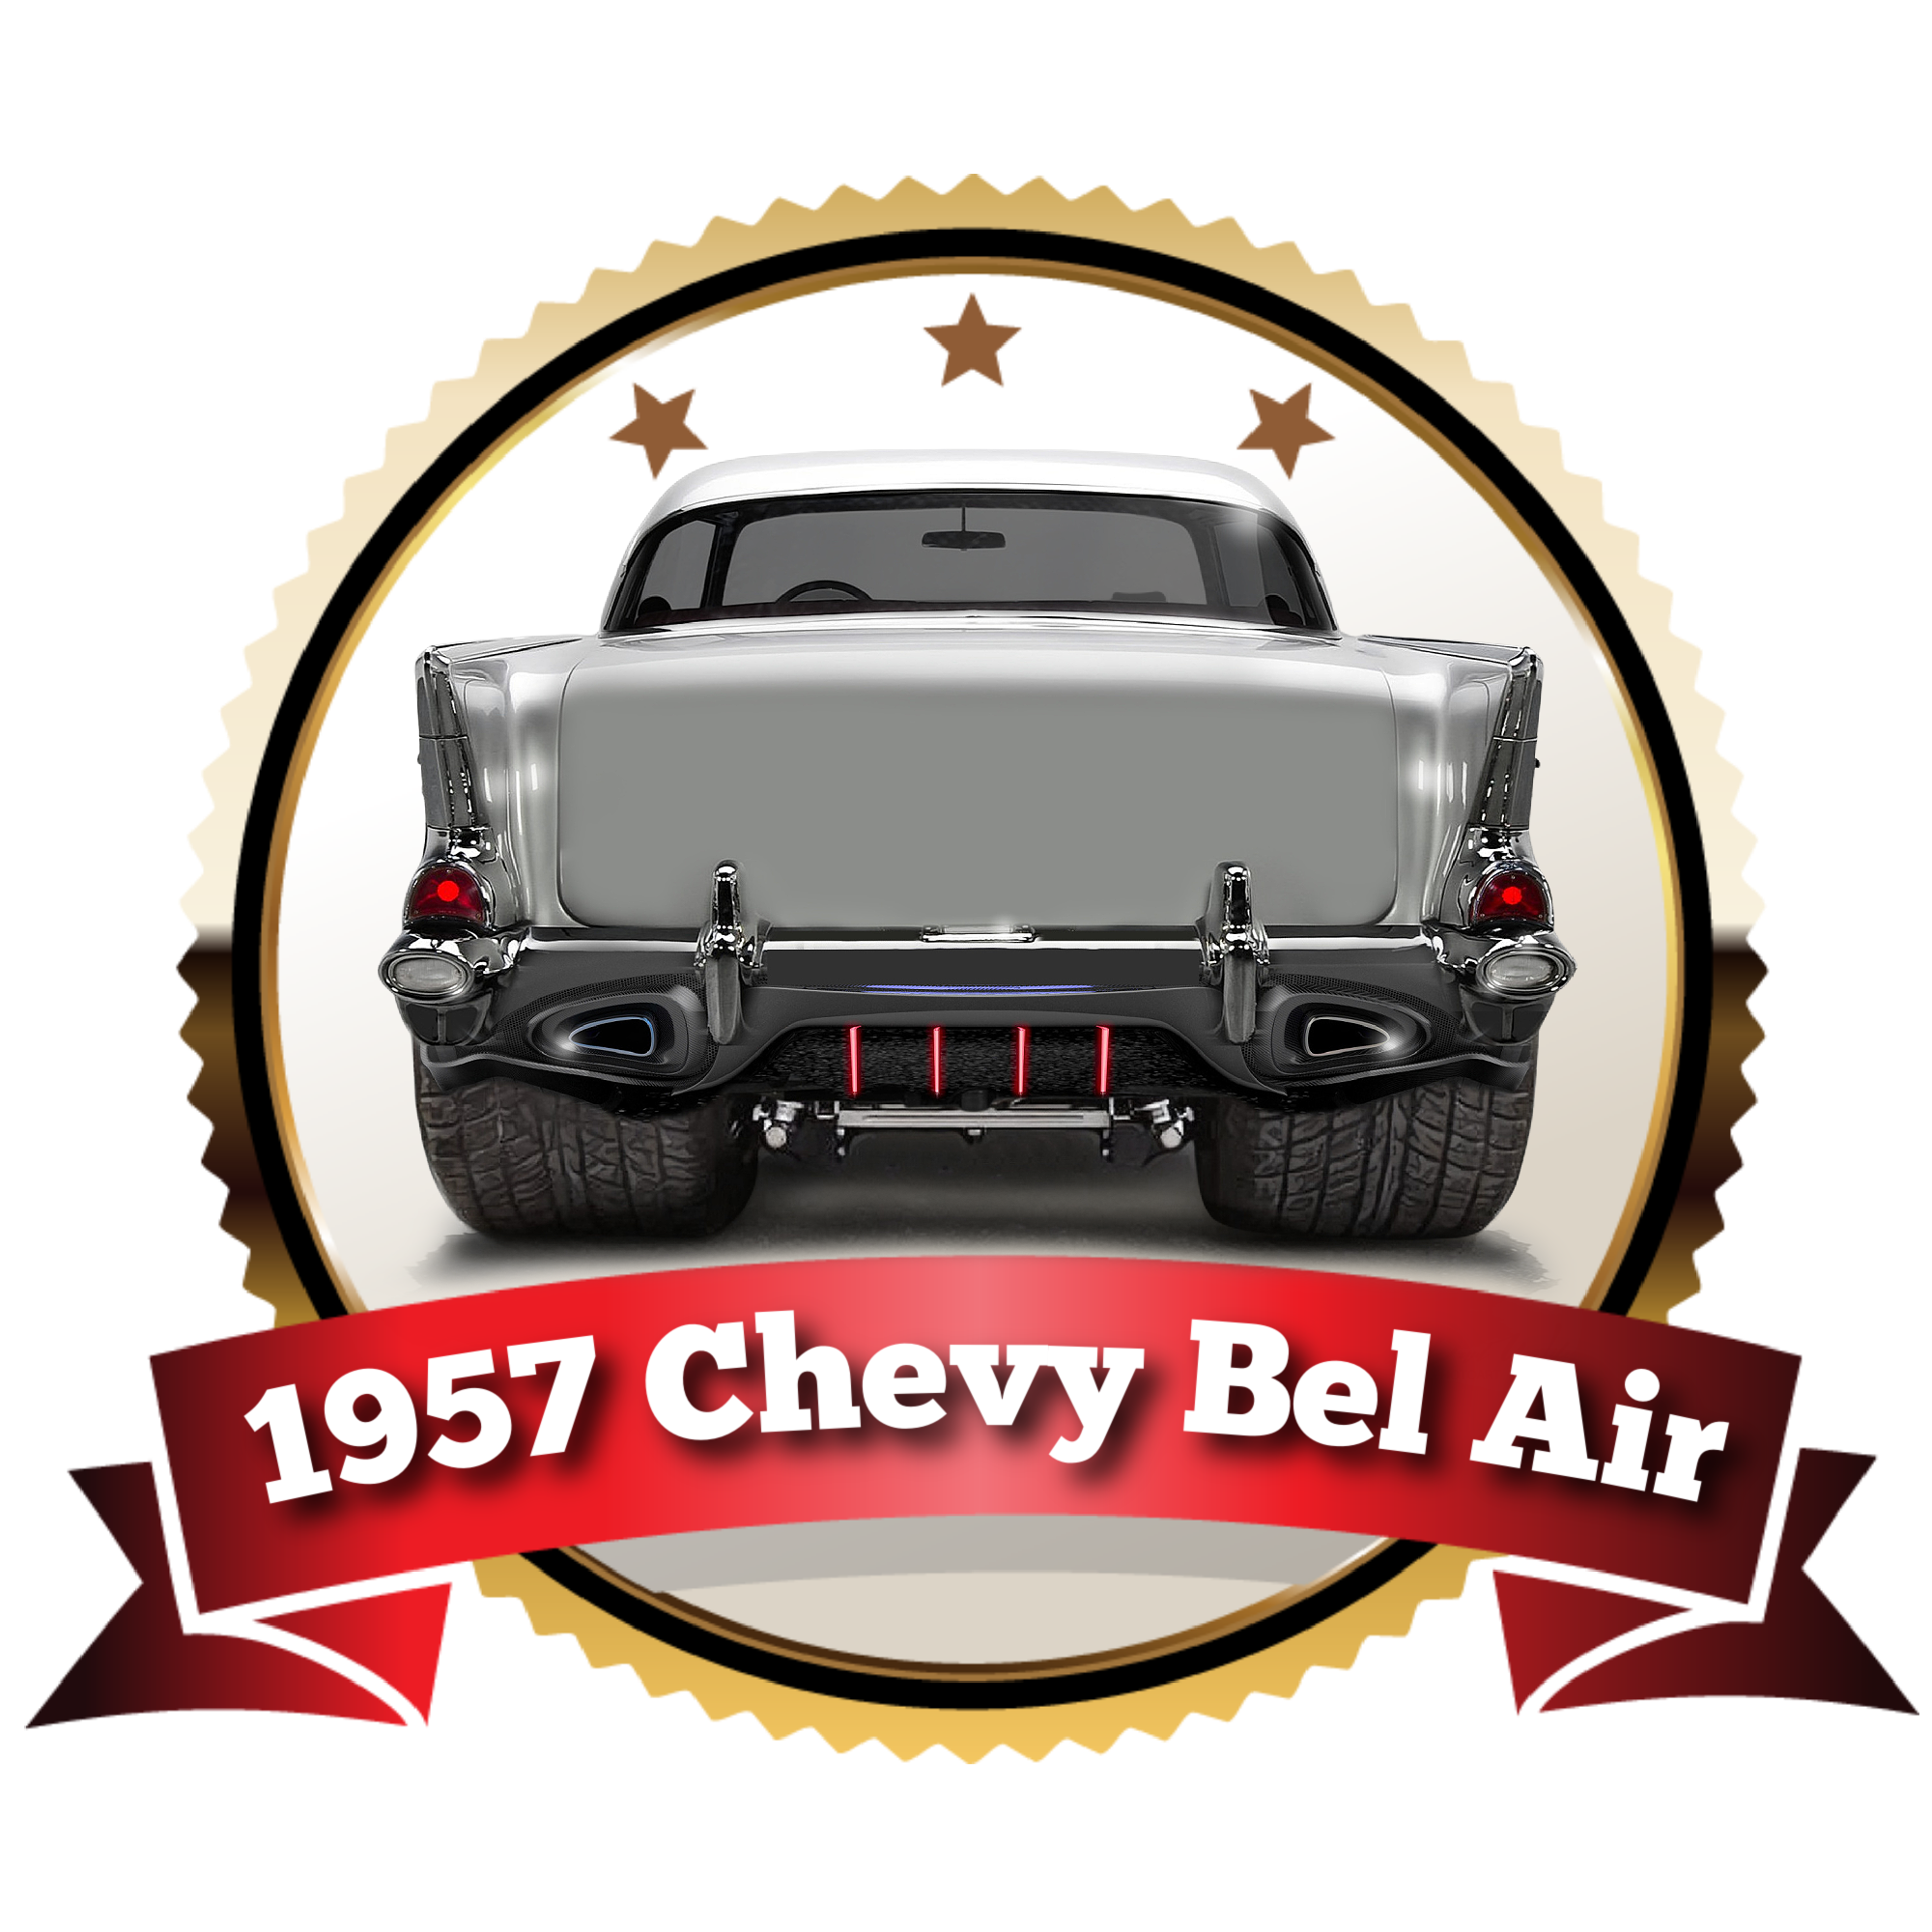 1957 Chevy Bel Air - Image